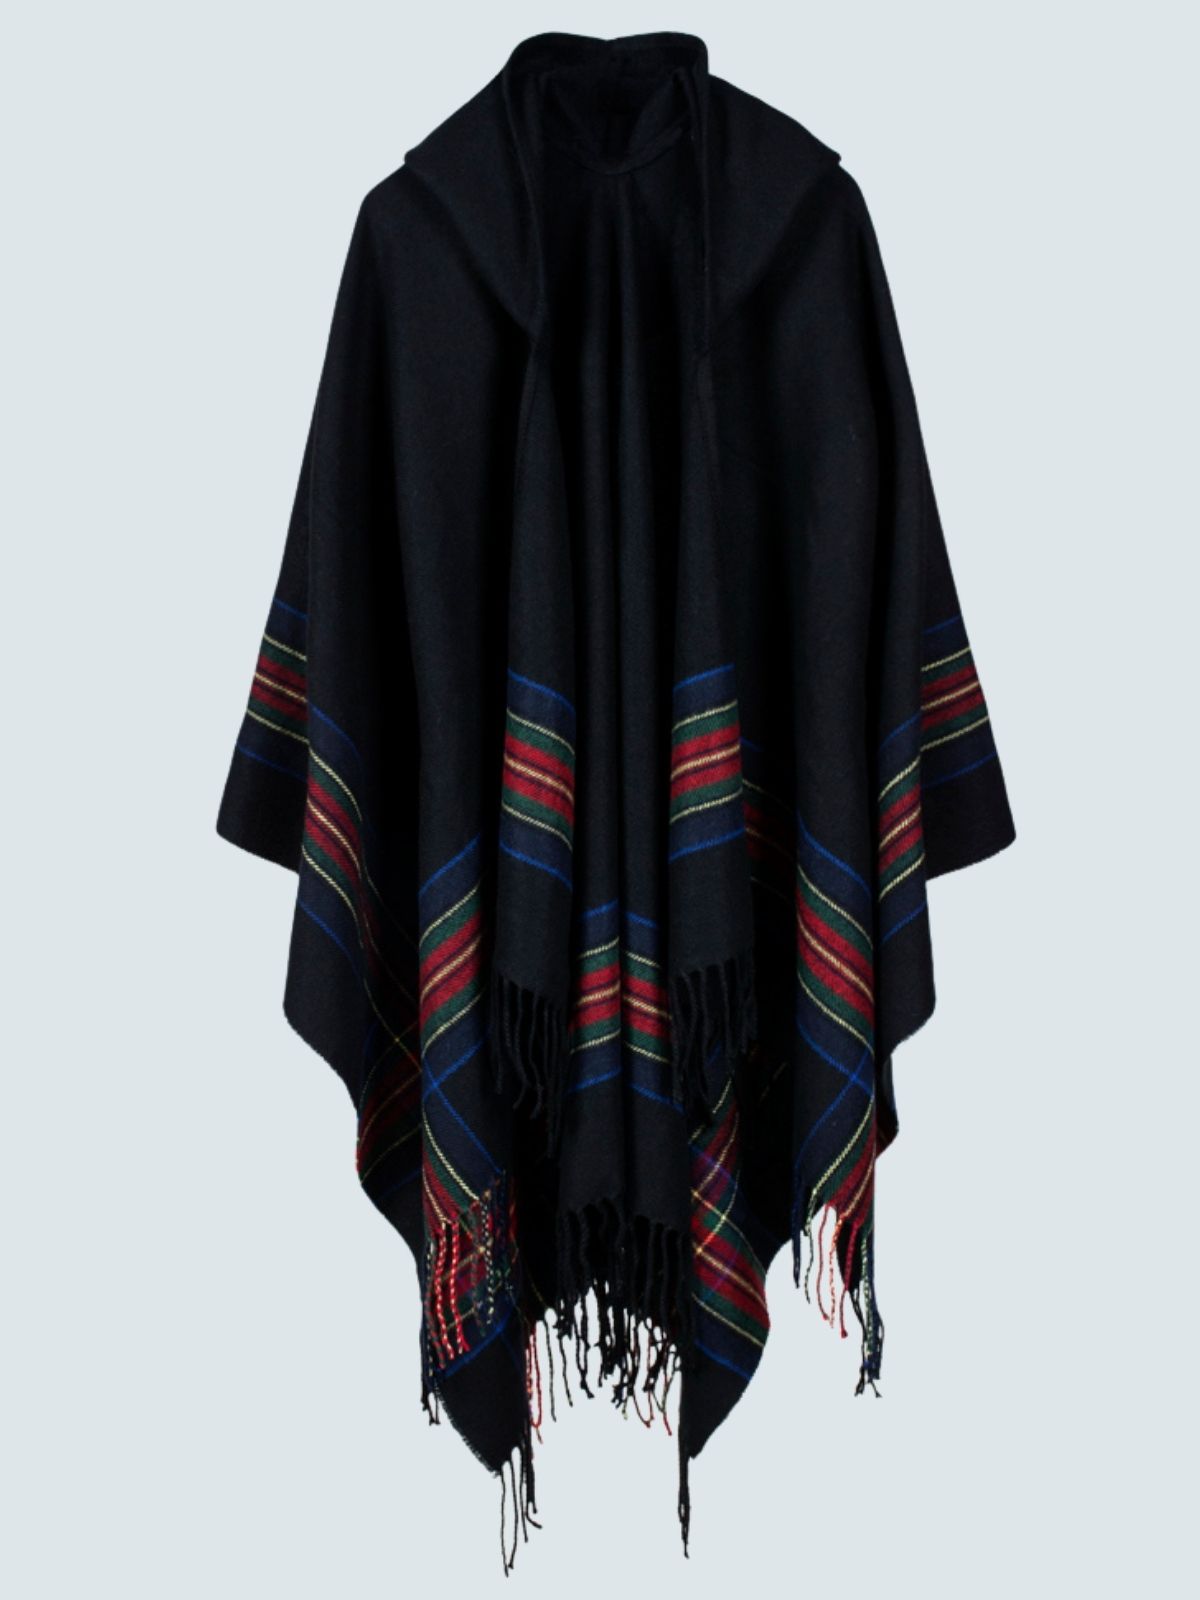 Women's Picturesque Hooded Poncho Cardigan Black